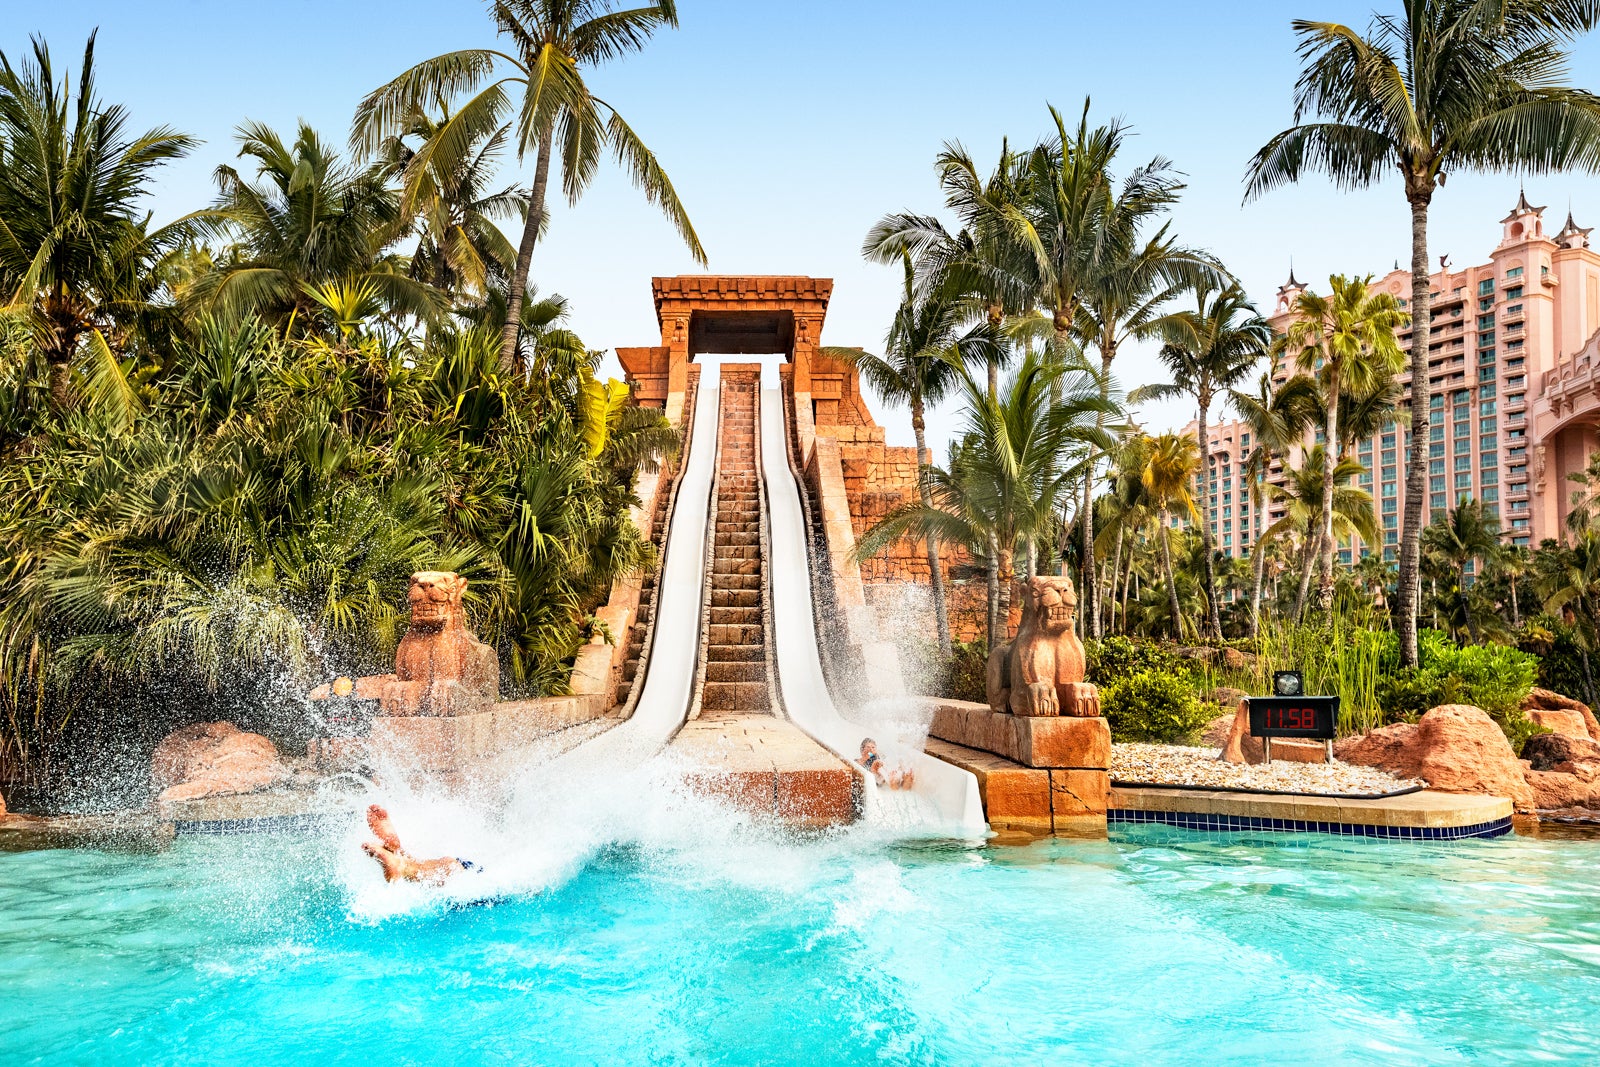 Here’s why your whole family will love Atlantis